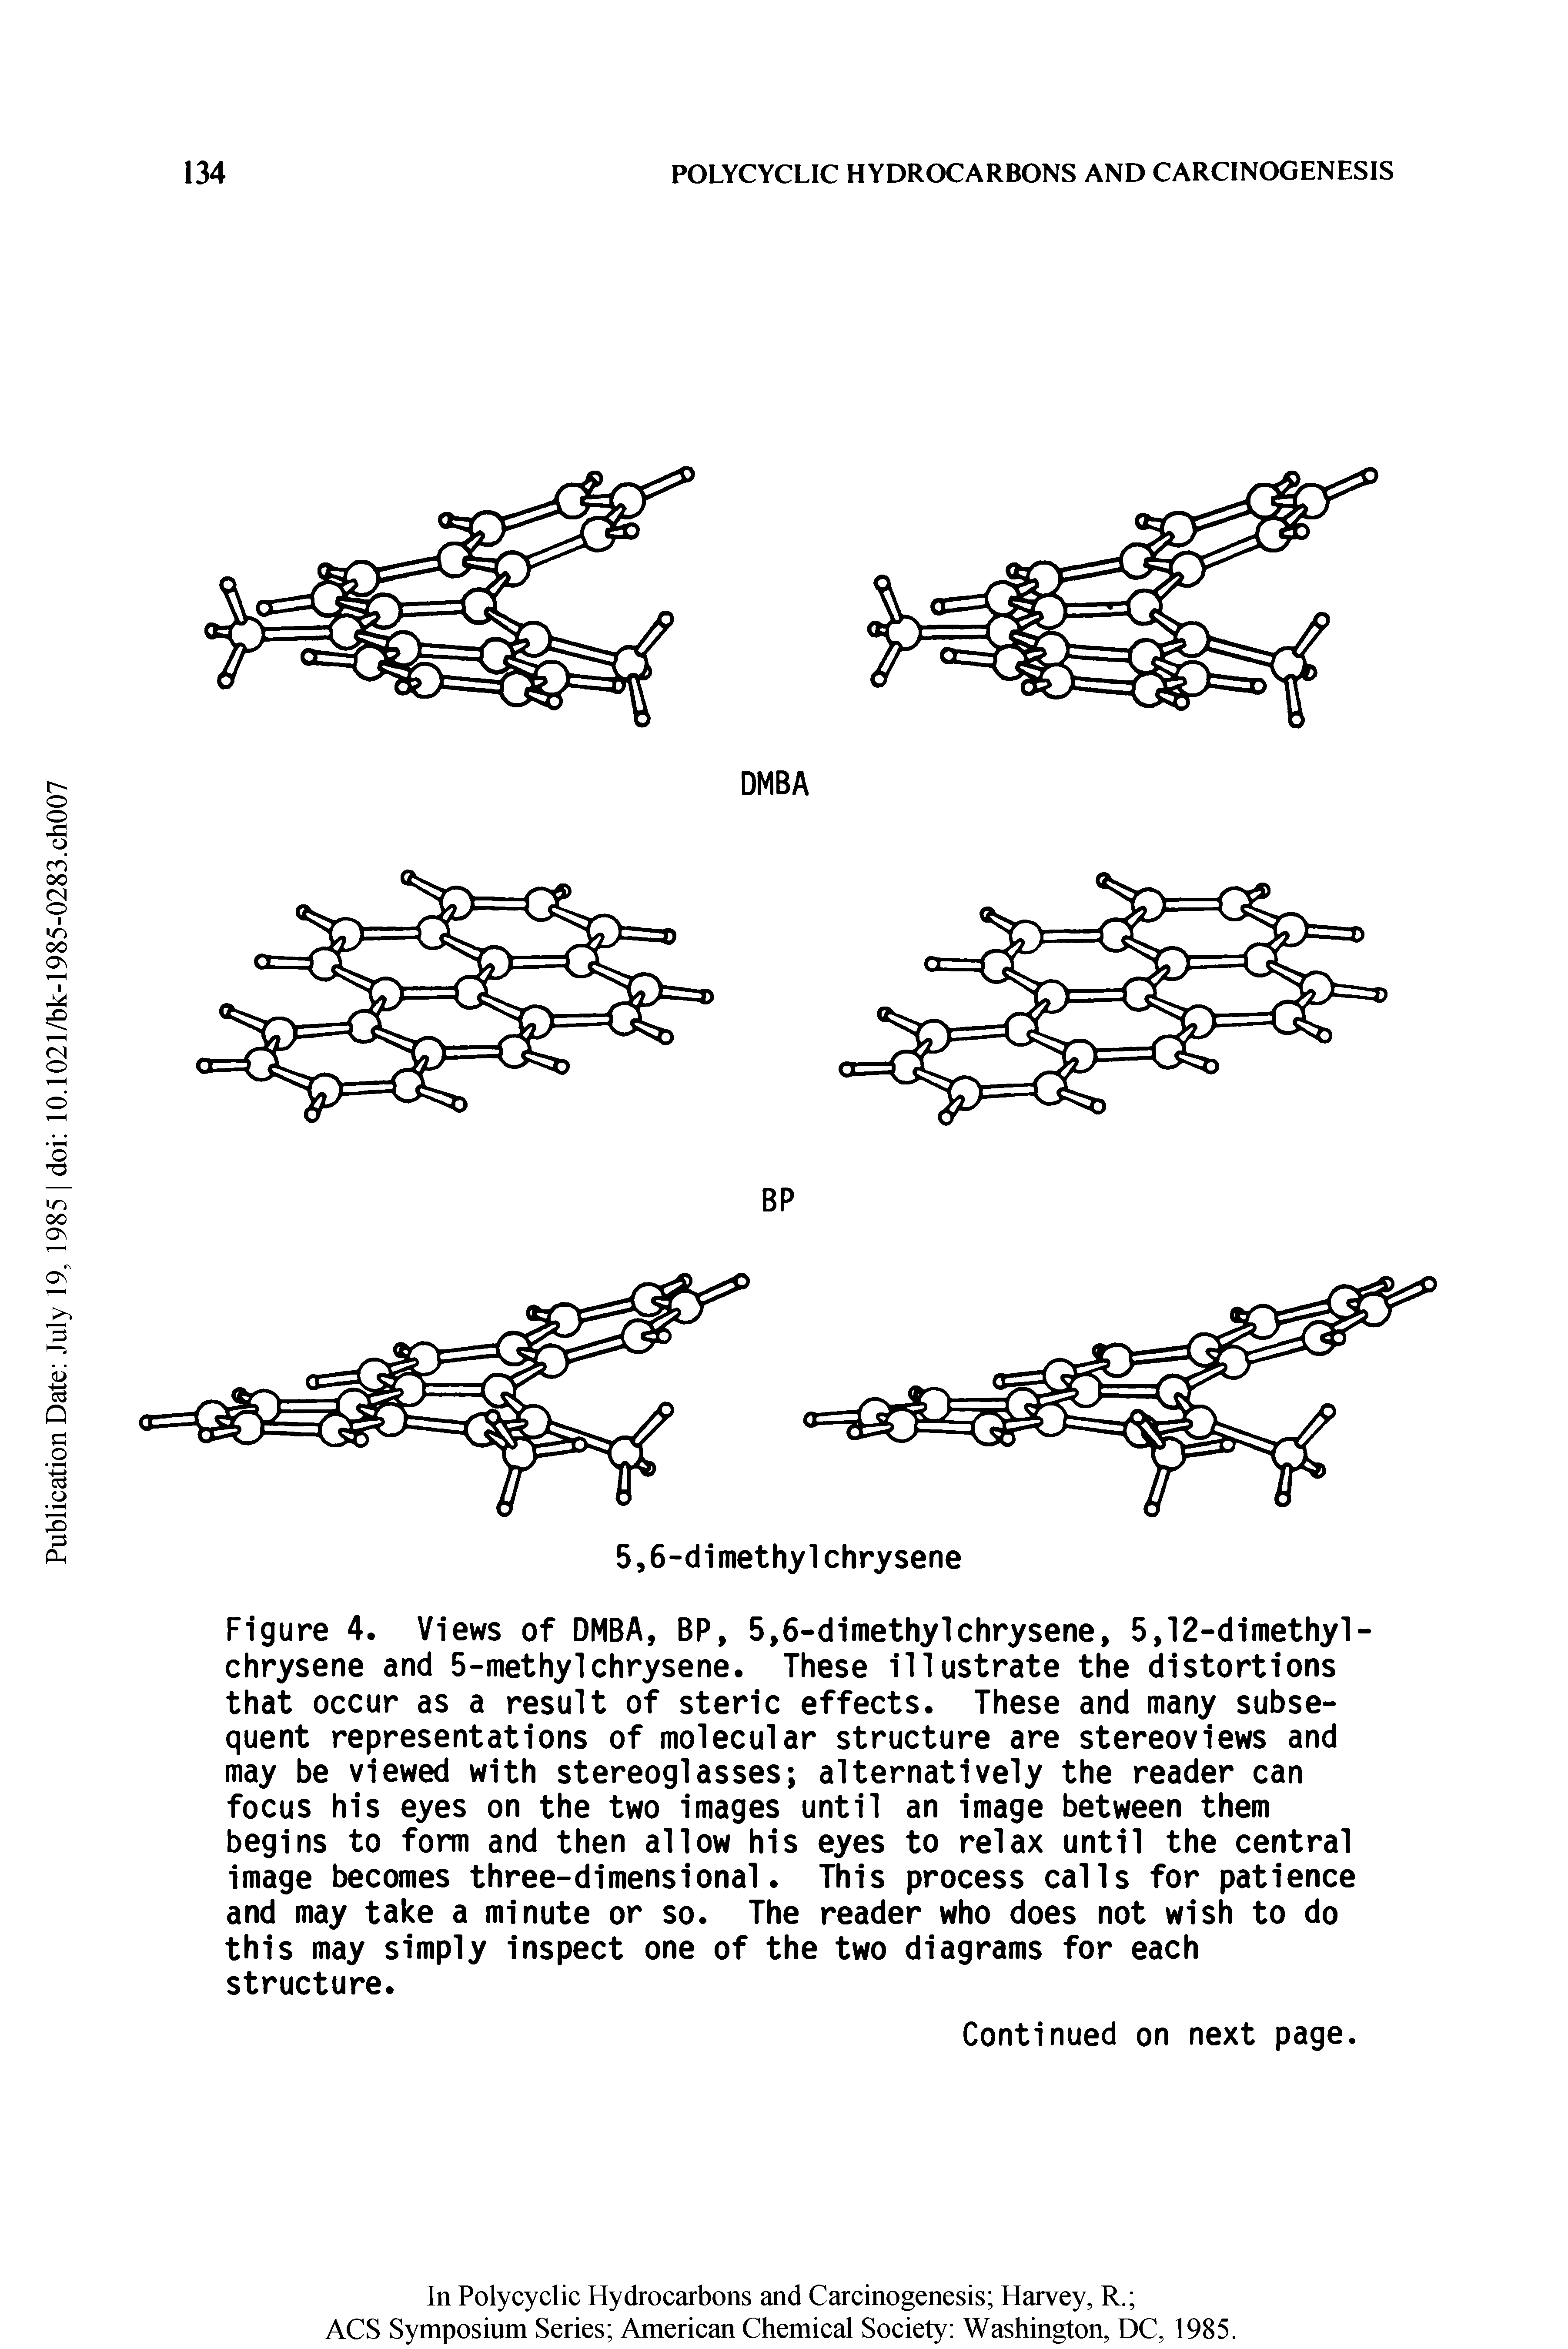 Figure 4. Views of DMBA, BP, 5,6-dimethylchrysene, 5,12-dimethyl-chrysene and 5-methyl chrysene. These illustrate the distortions that occur as a result of steric effects. These and many subsequent representations of molecular structure are stereoviews and may be viewed with stereoglasses alternatively the reader can focus his eyes on the two images until an image between them begins to form and then allow his eyes to relax until the central image becomes three-dimensional. This process calls for patience and may take a minute or so. The reader who does not wish to do this may simply inspect one of the two diagrams for each structure.